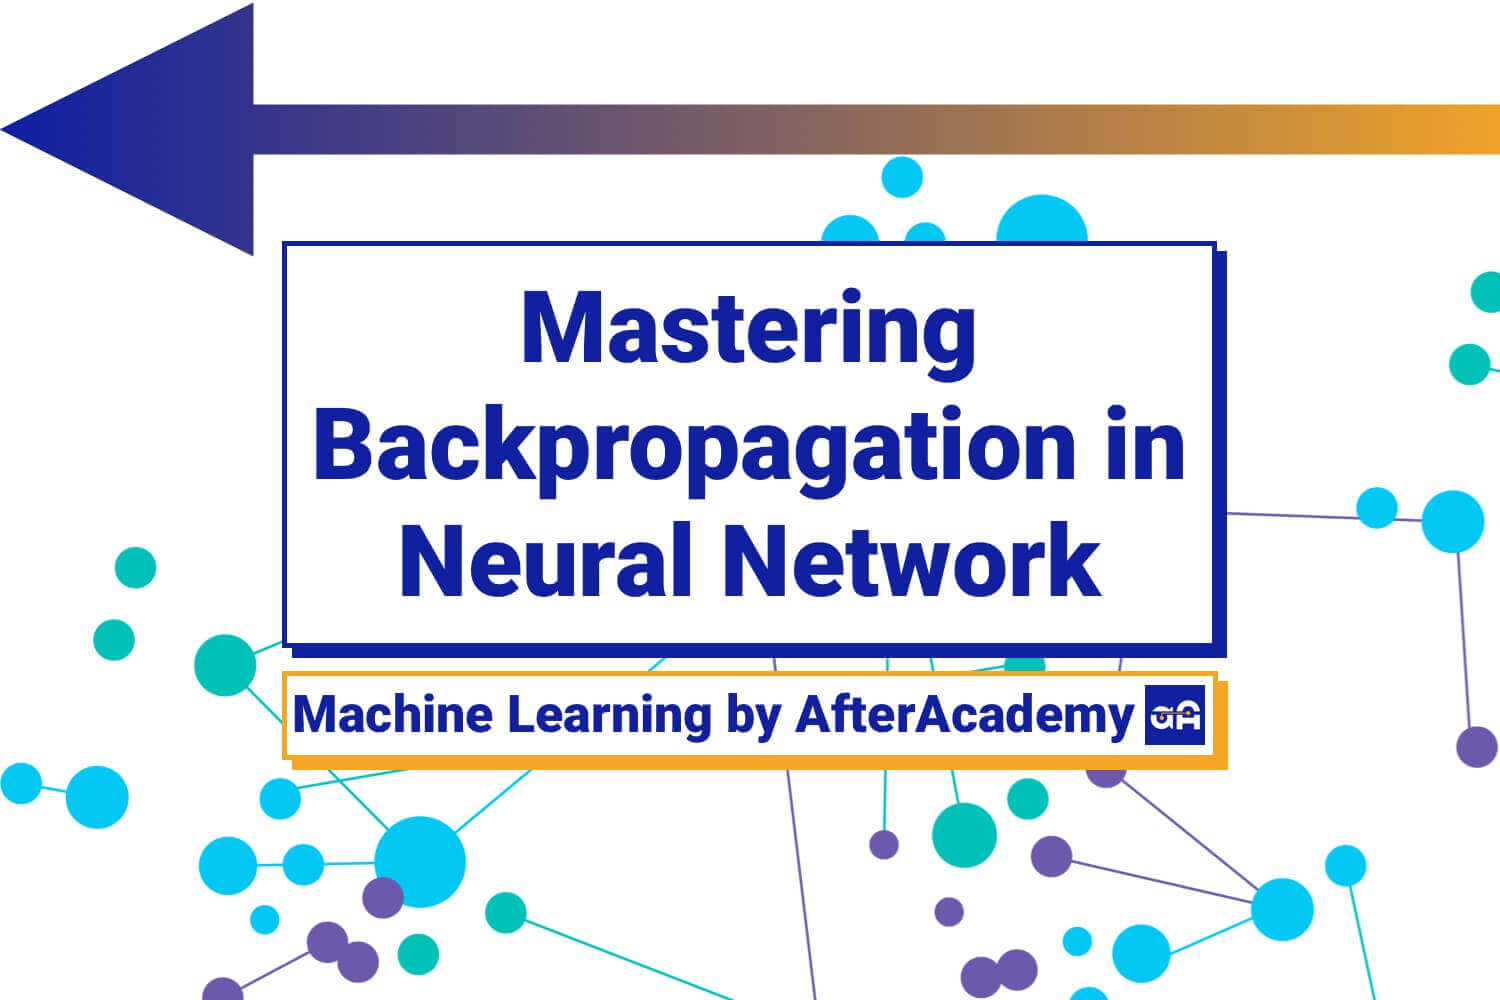 Mastering Backpropagation in Neural Network